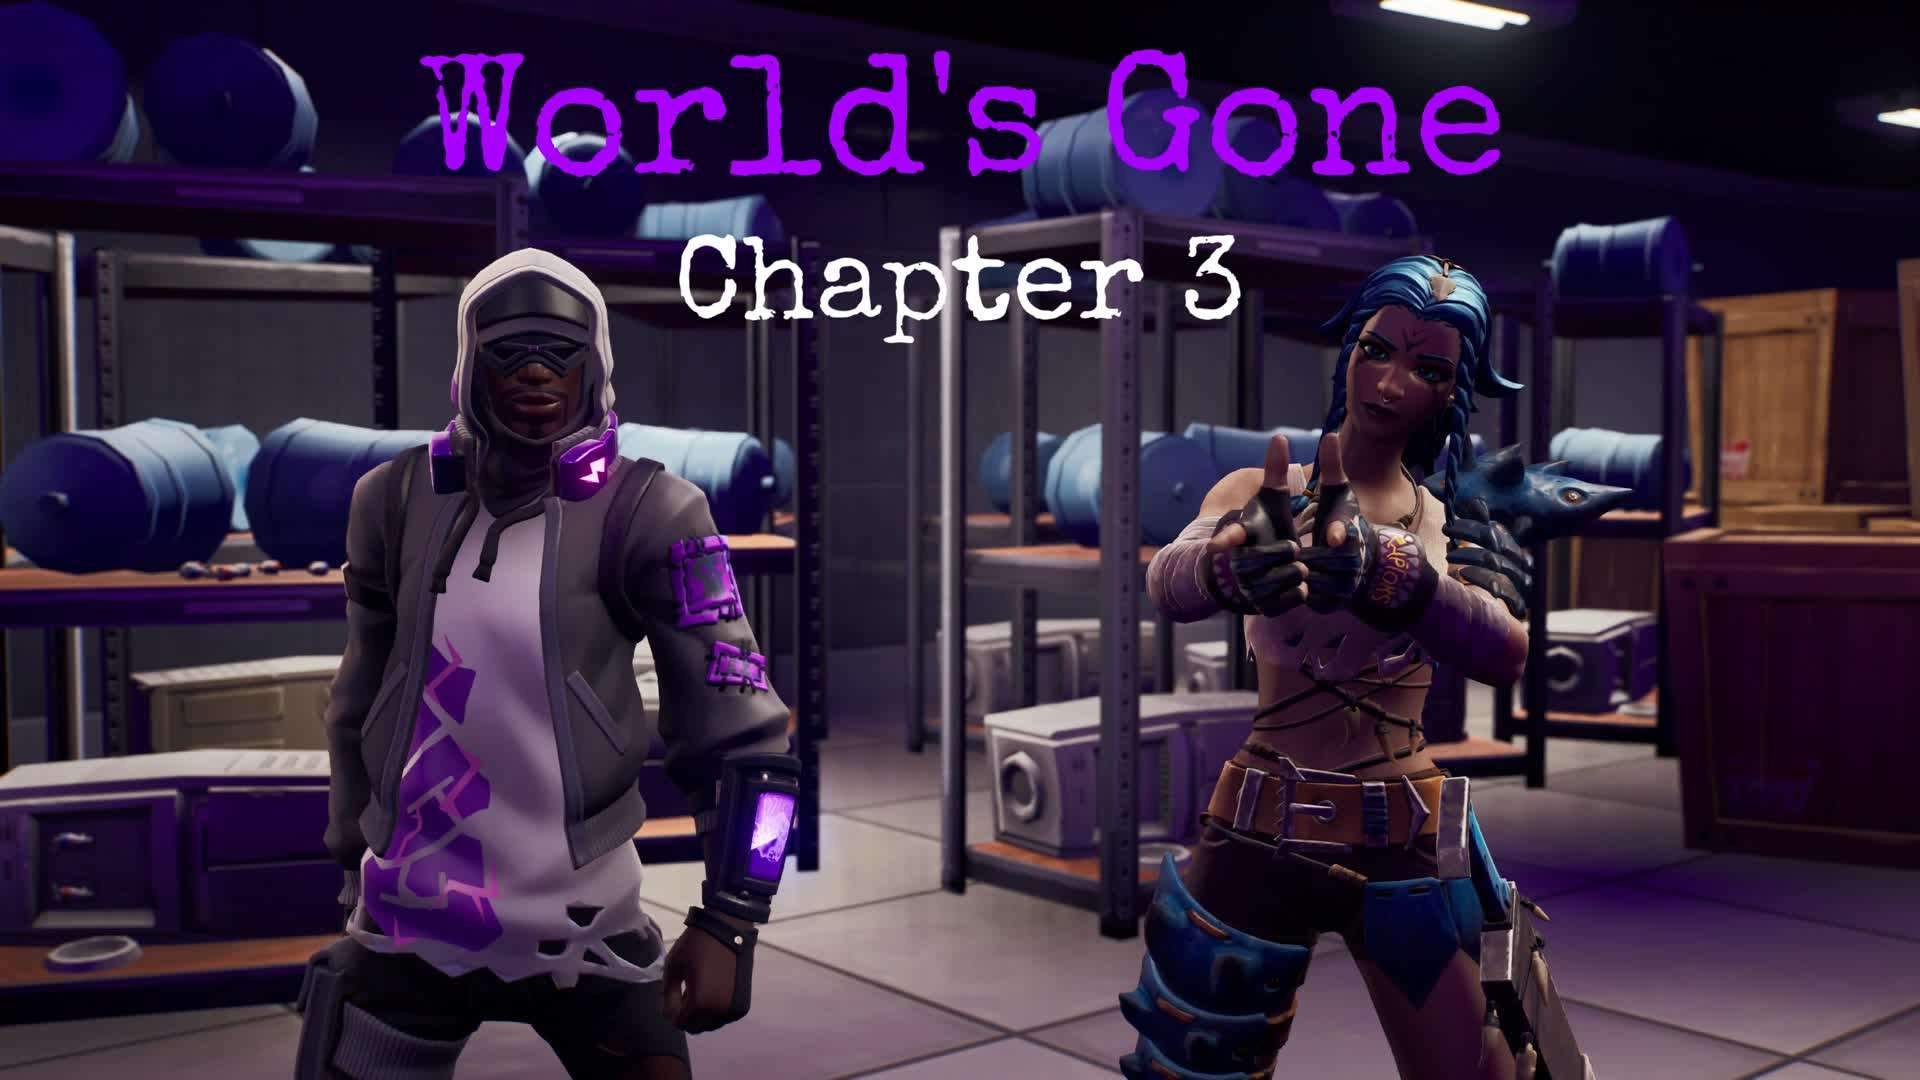 WORLD'S GONE CHAPTER 3